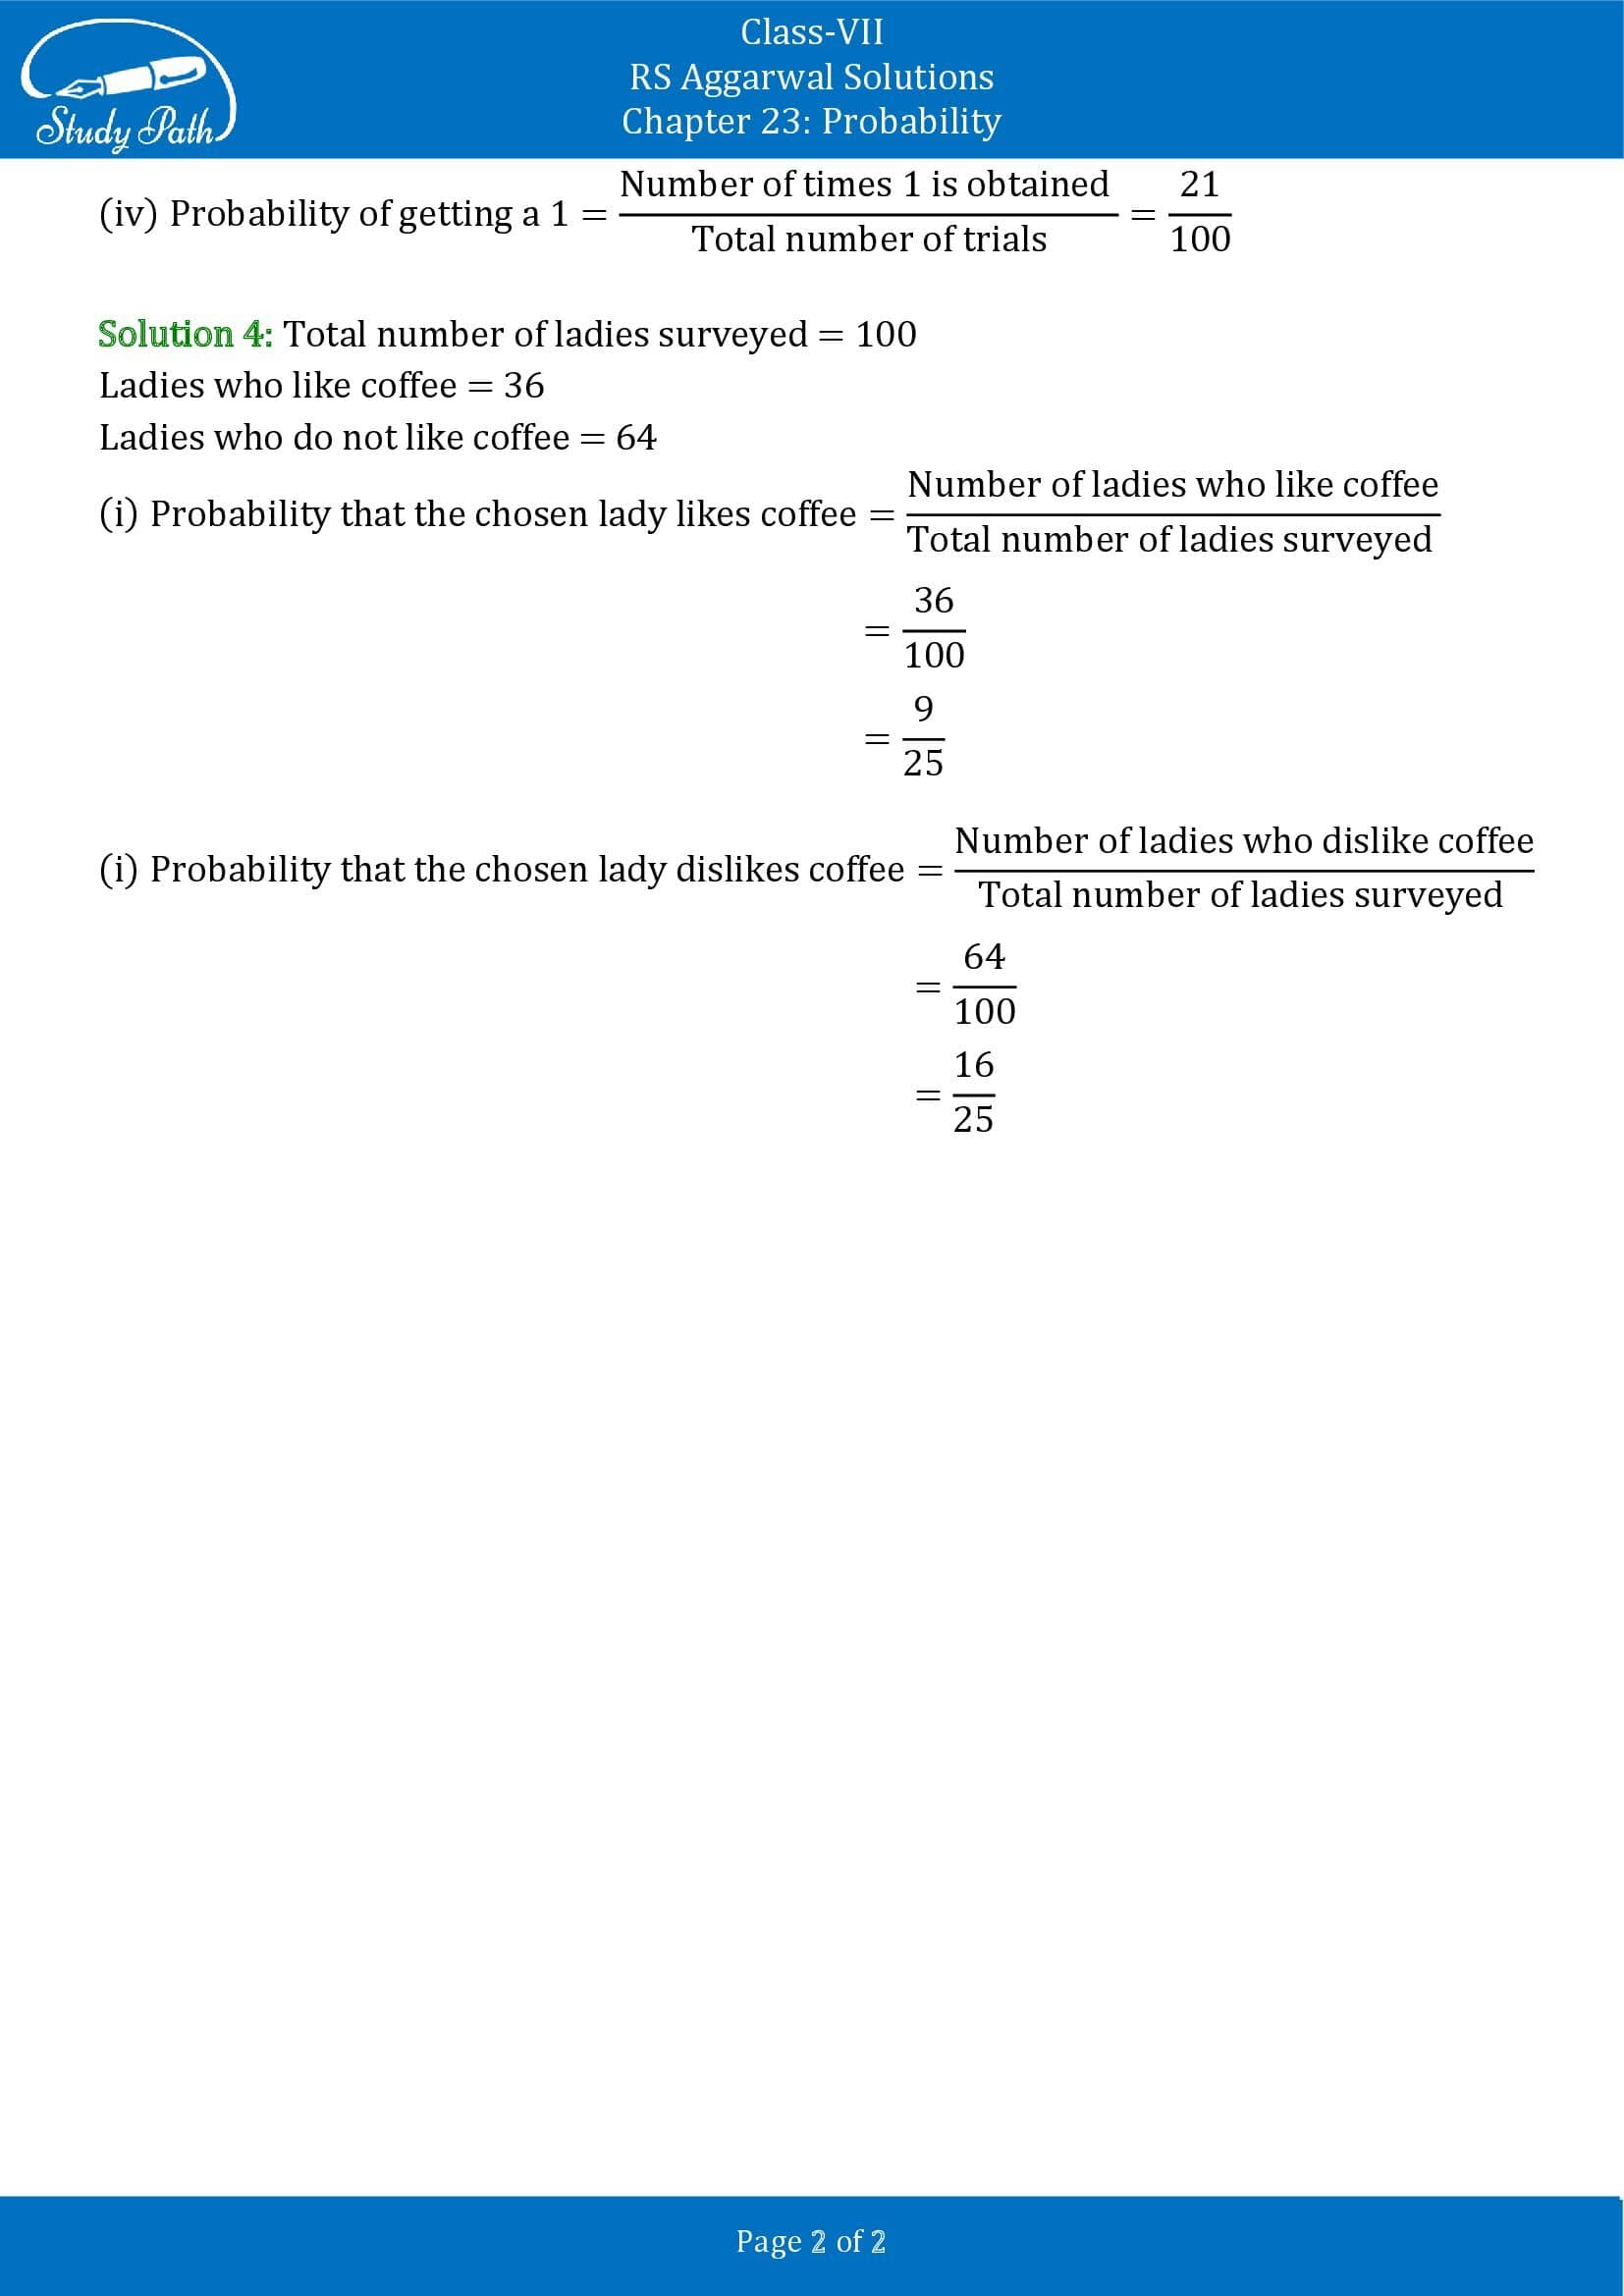 RS Aggarwal Solutions Class 7 Chapter 23 Probability 00002